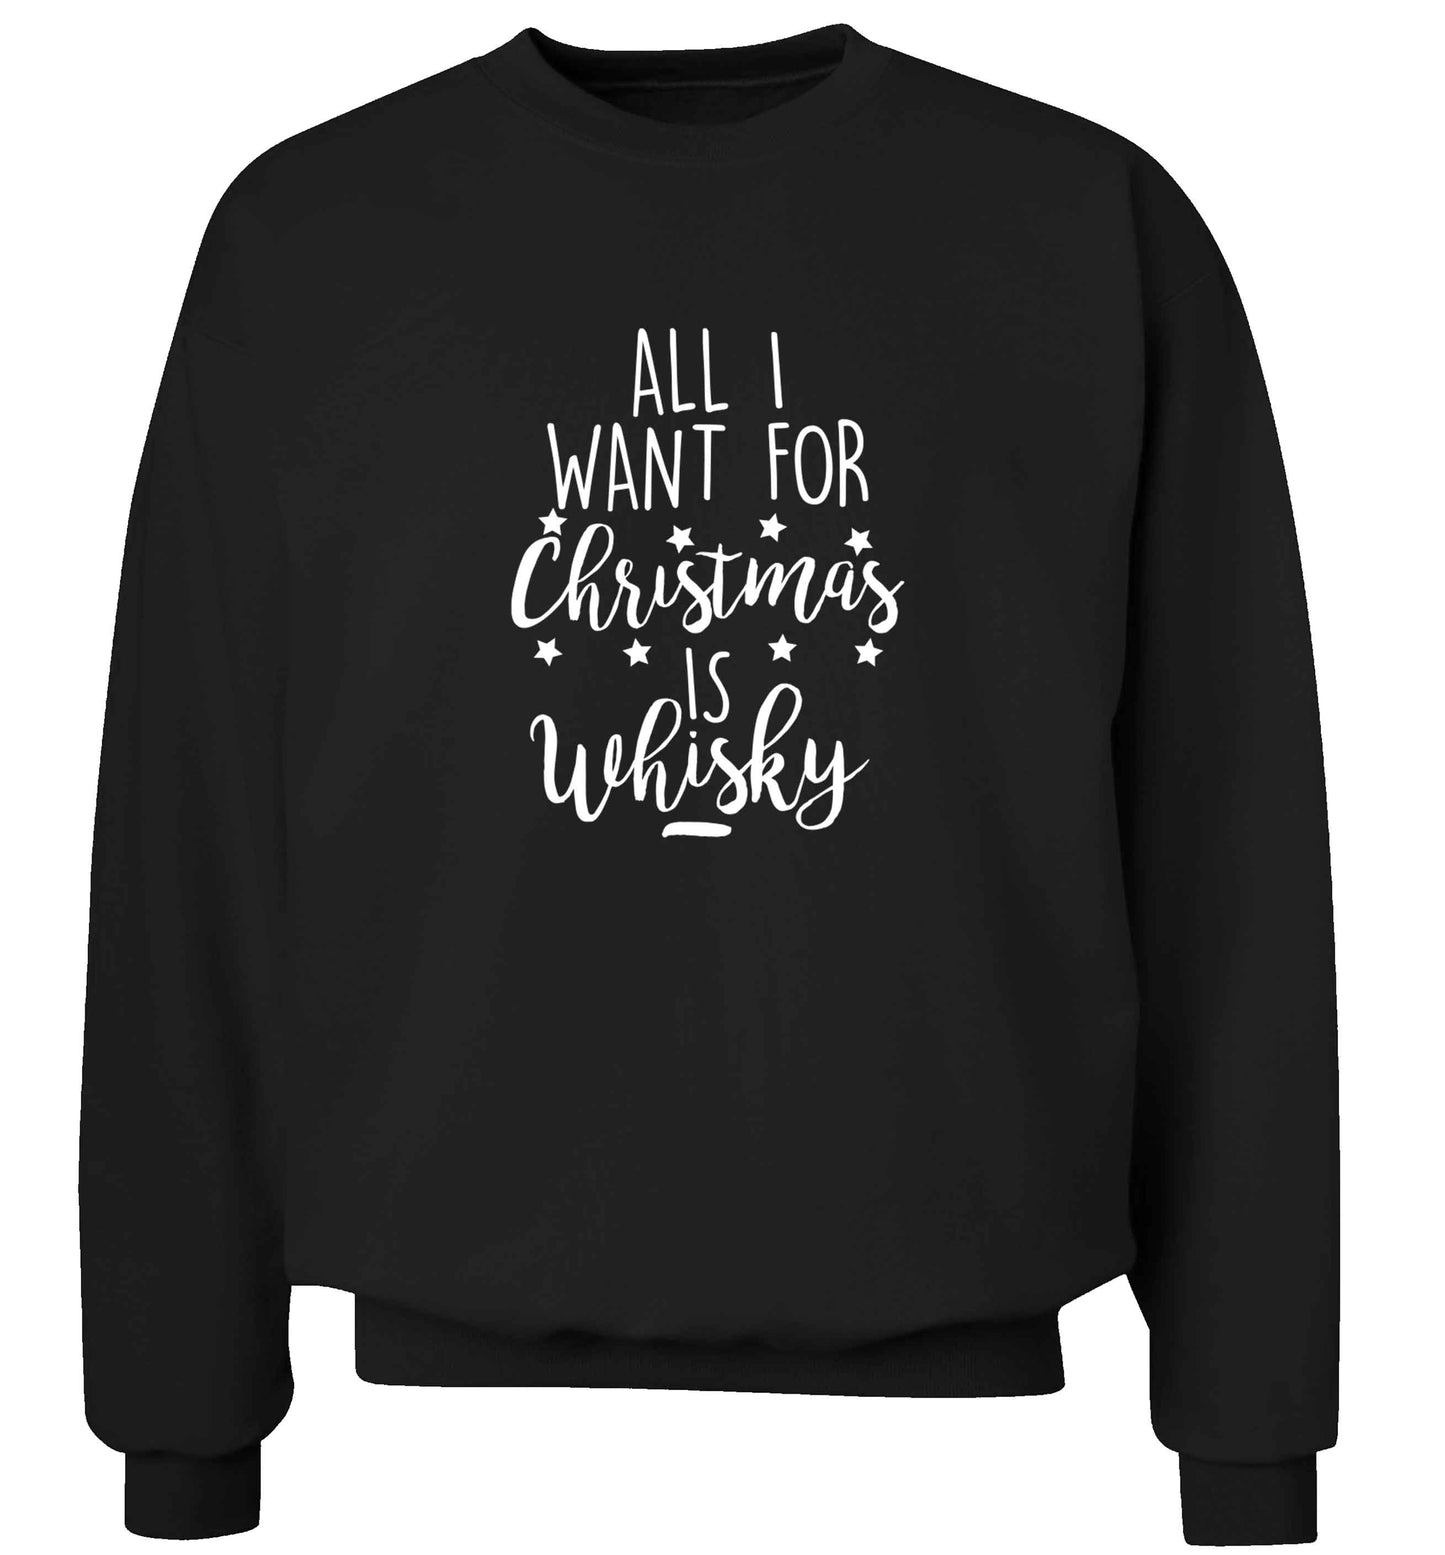 All I want for Christmas is whisky adult's unisex black sweater 2XL